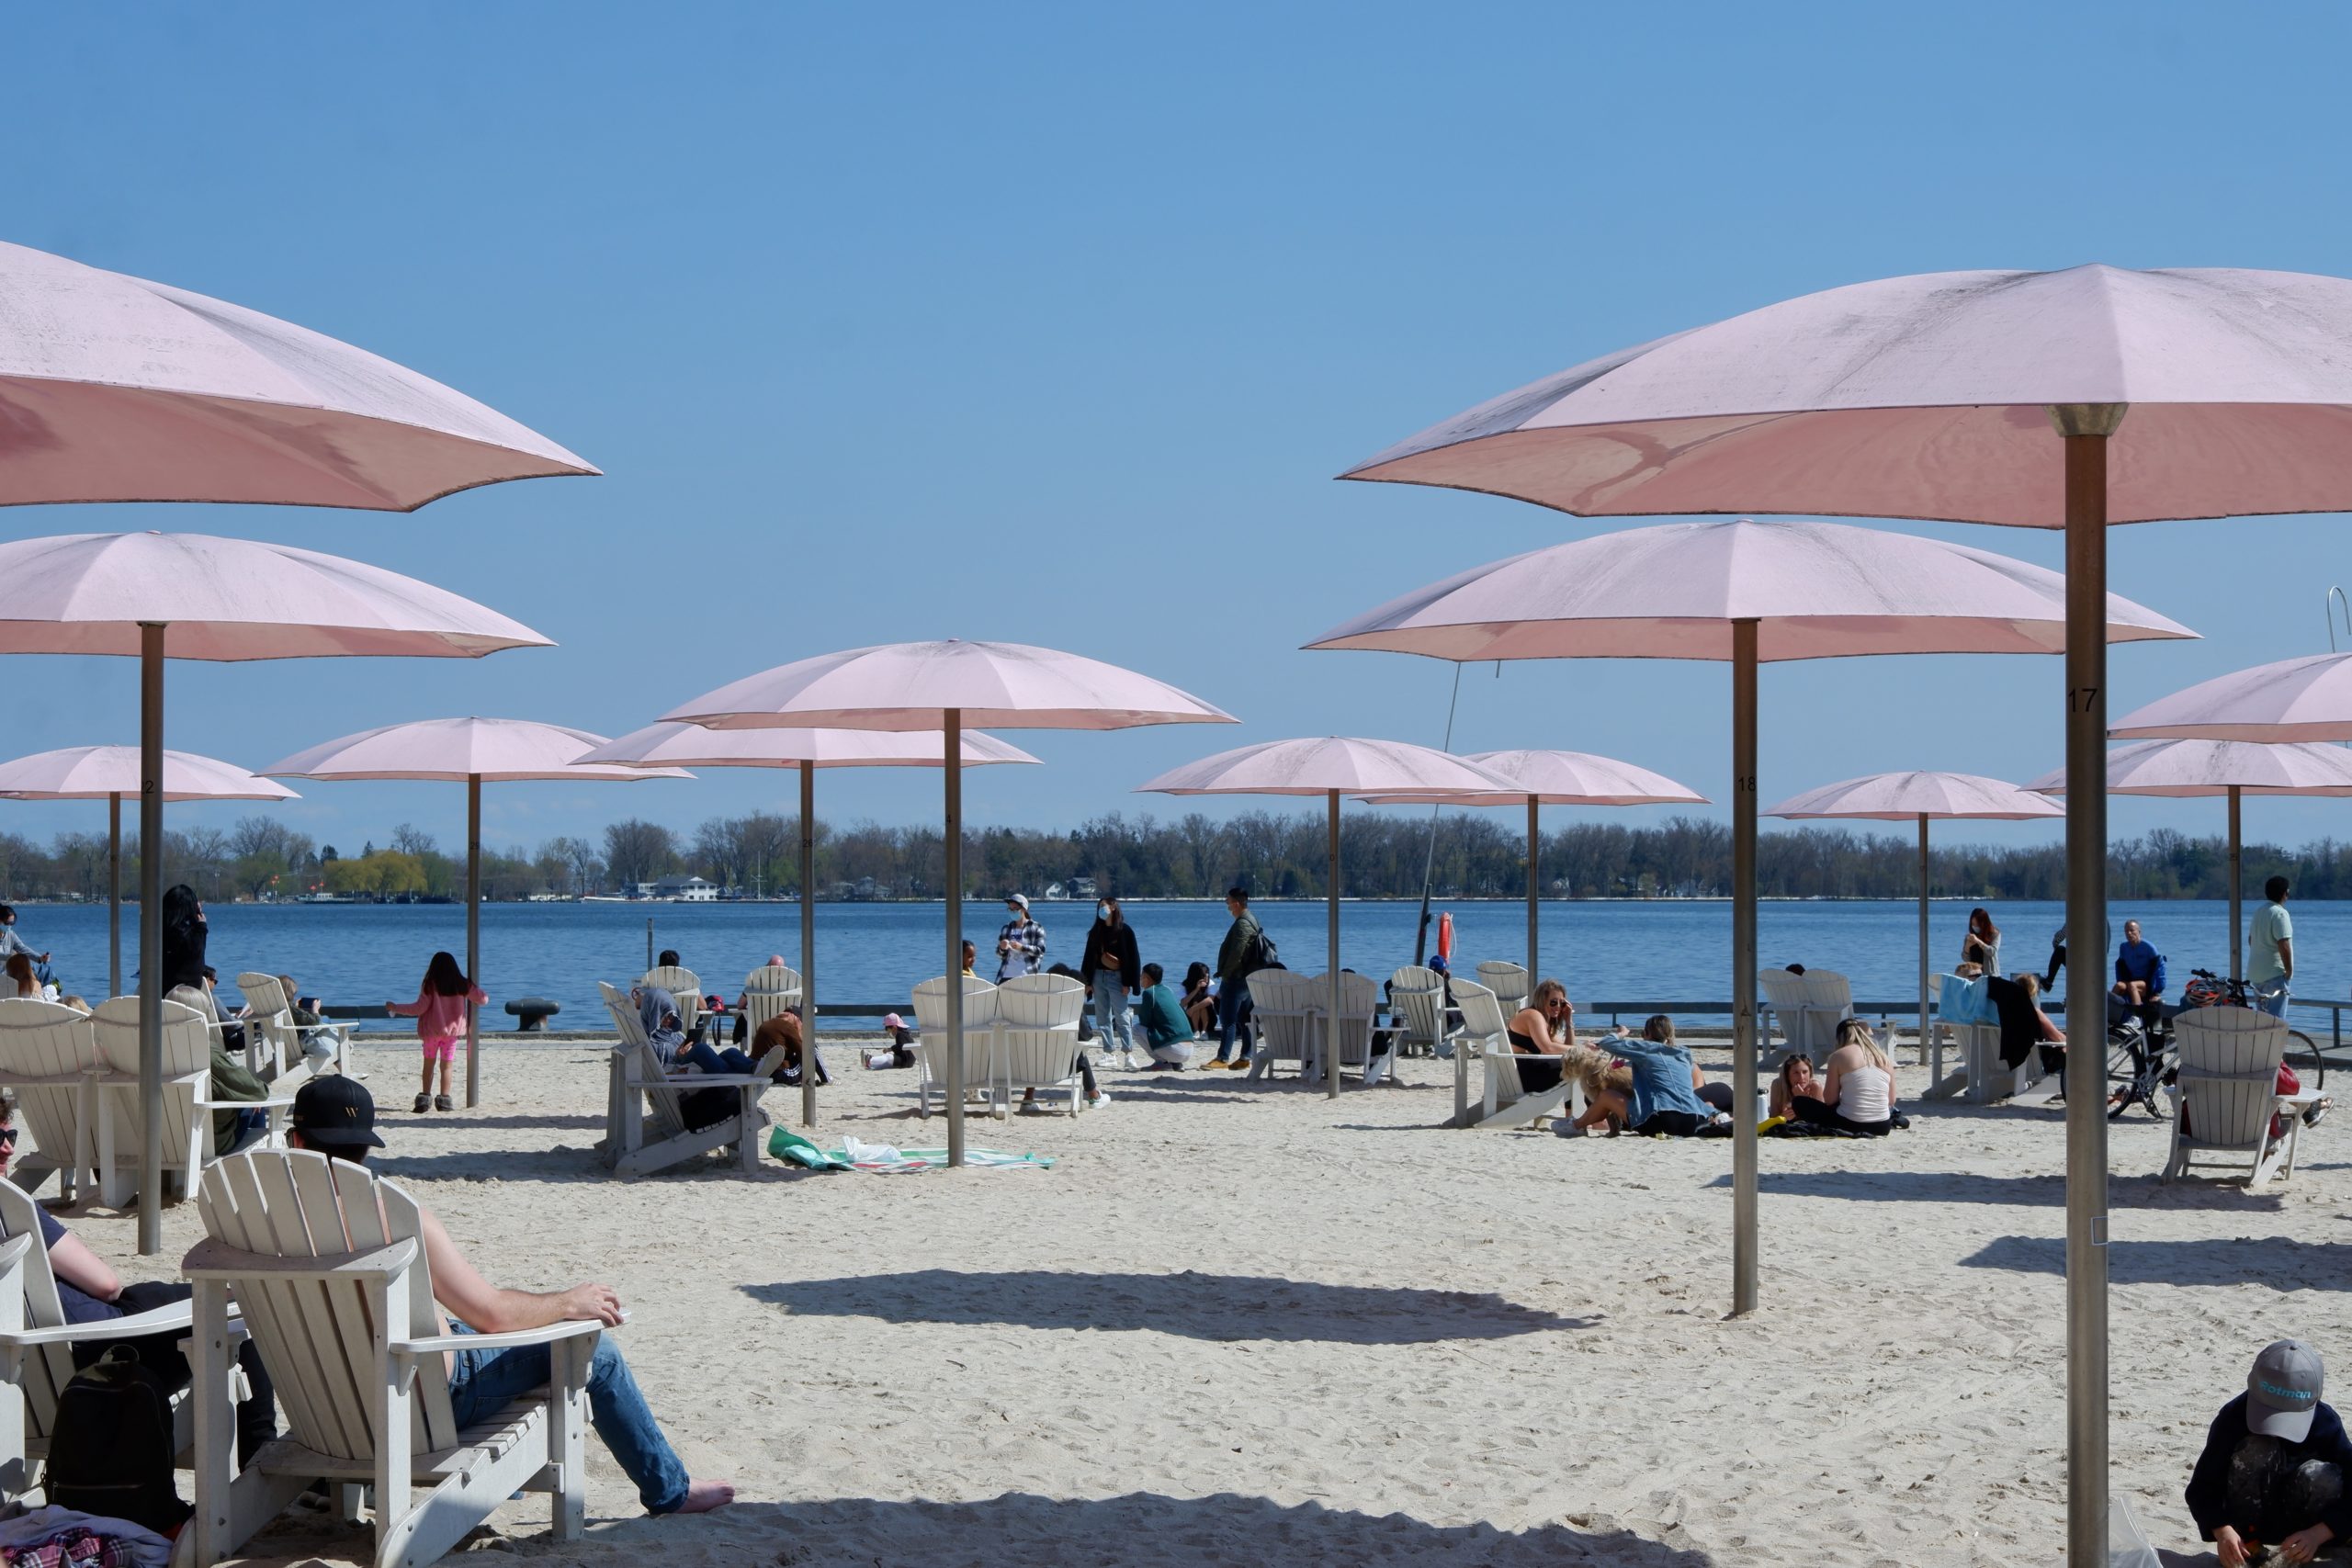 Visitors enjoy Cherry beach, a placemaking project in Toronto